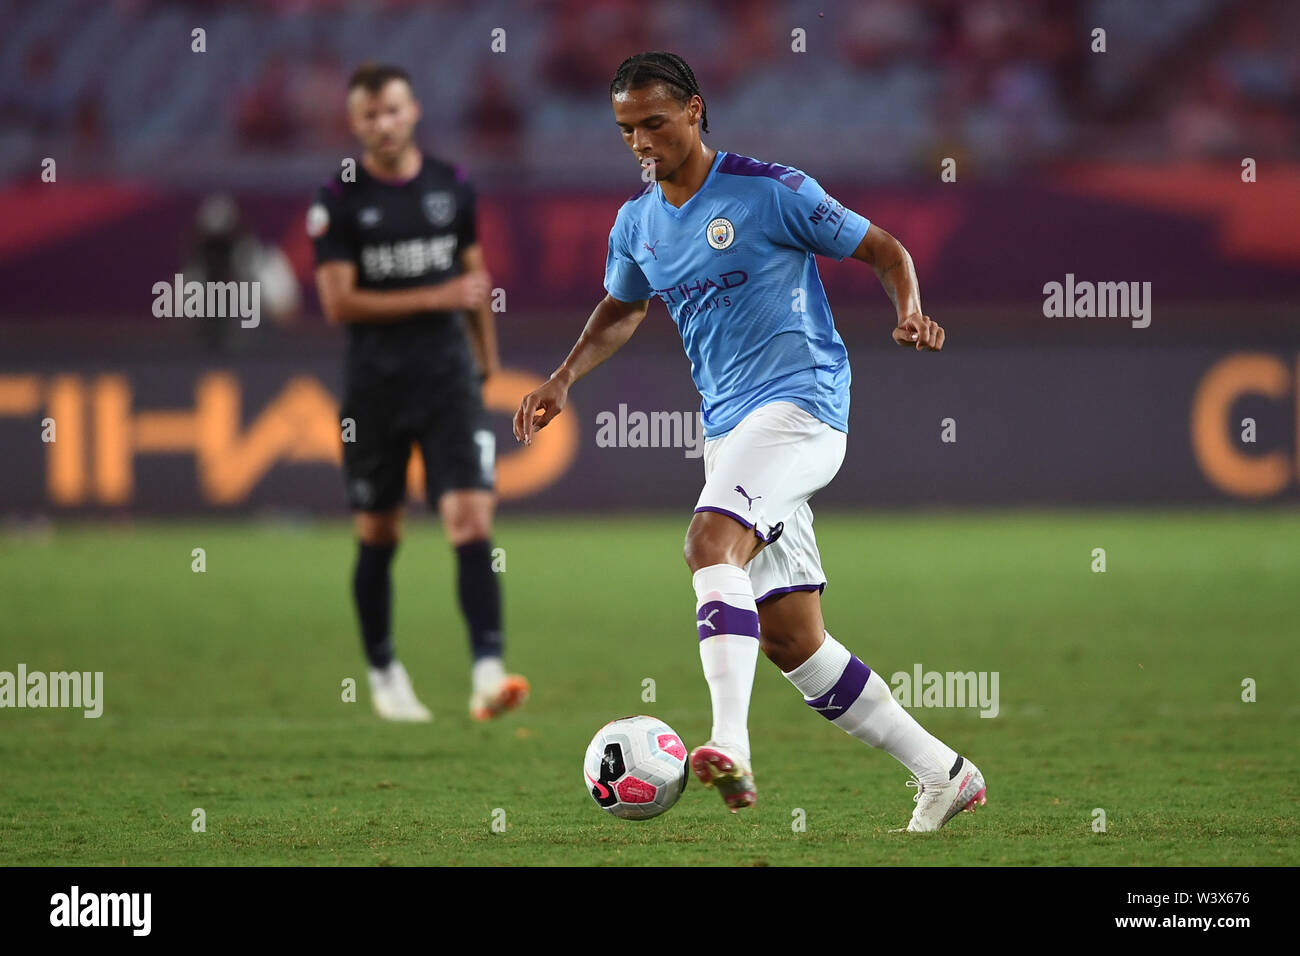 German football player Leroy Sane of Manchester City F.C. of English League champions dribbles against West Ham United F.C. in the semifinal match of the Premier League Asia Trophy 2019 in Nanjing city, east China's Jiangsu province, 17 July 2019. Manchester City F.C. defeated West Ham United F.C. 4-1. Stock Photo